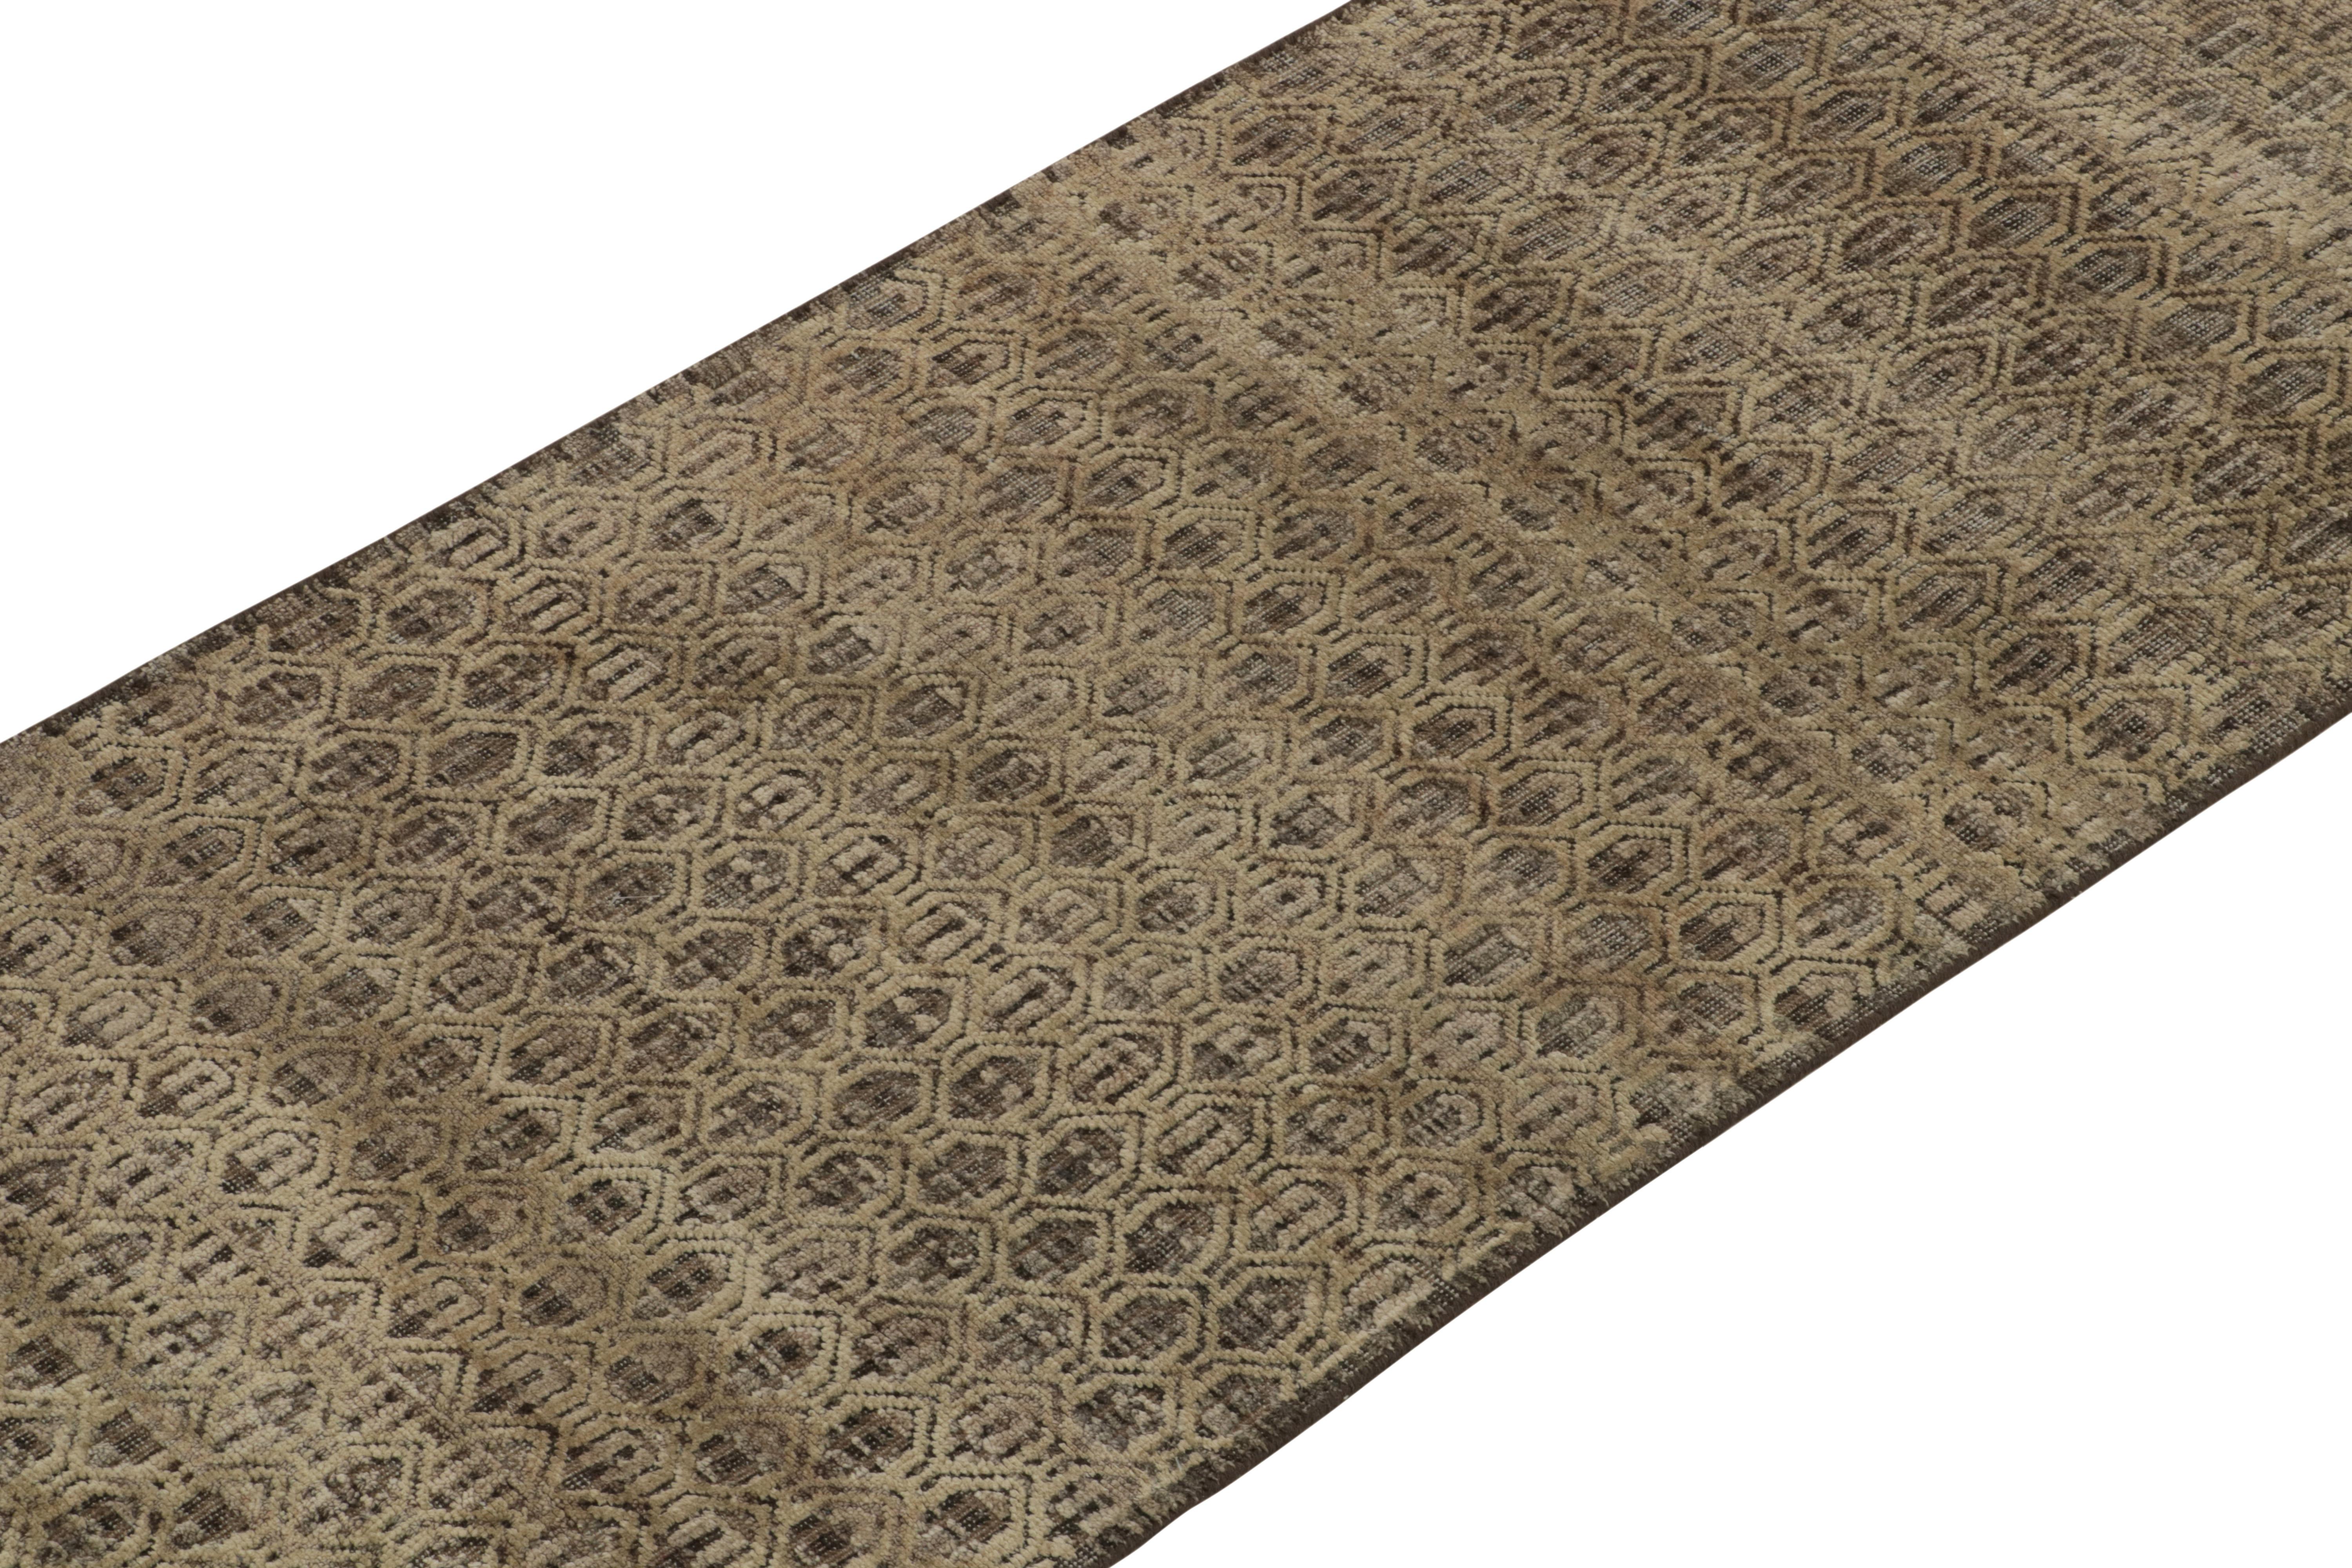 Hand-Knotted Rug & Kilim’s Modern Textural Runner in Beige-Brown High-Low Geometric Patterns For Sale